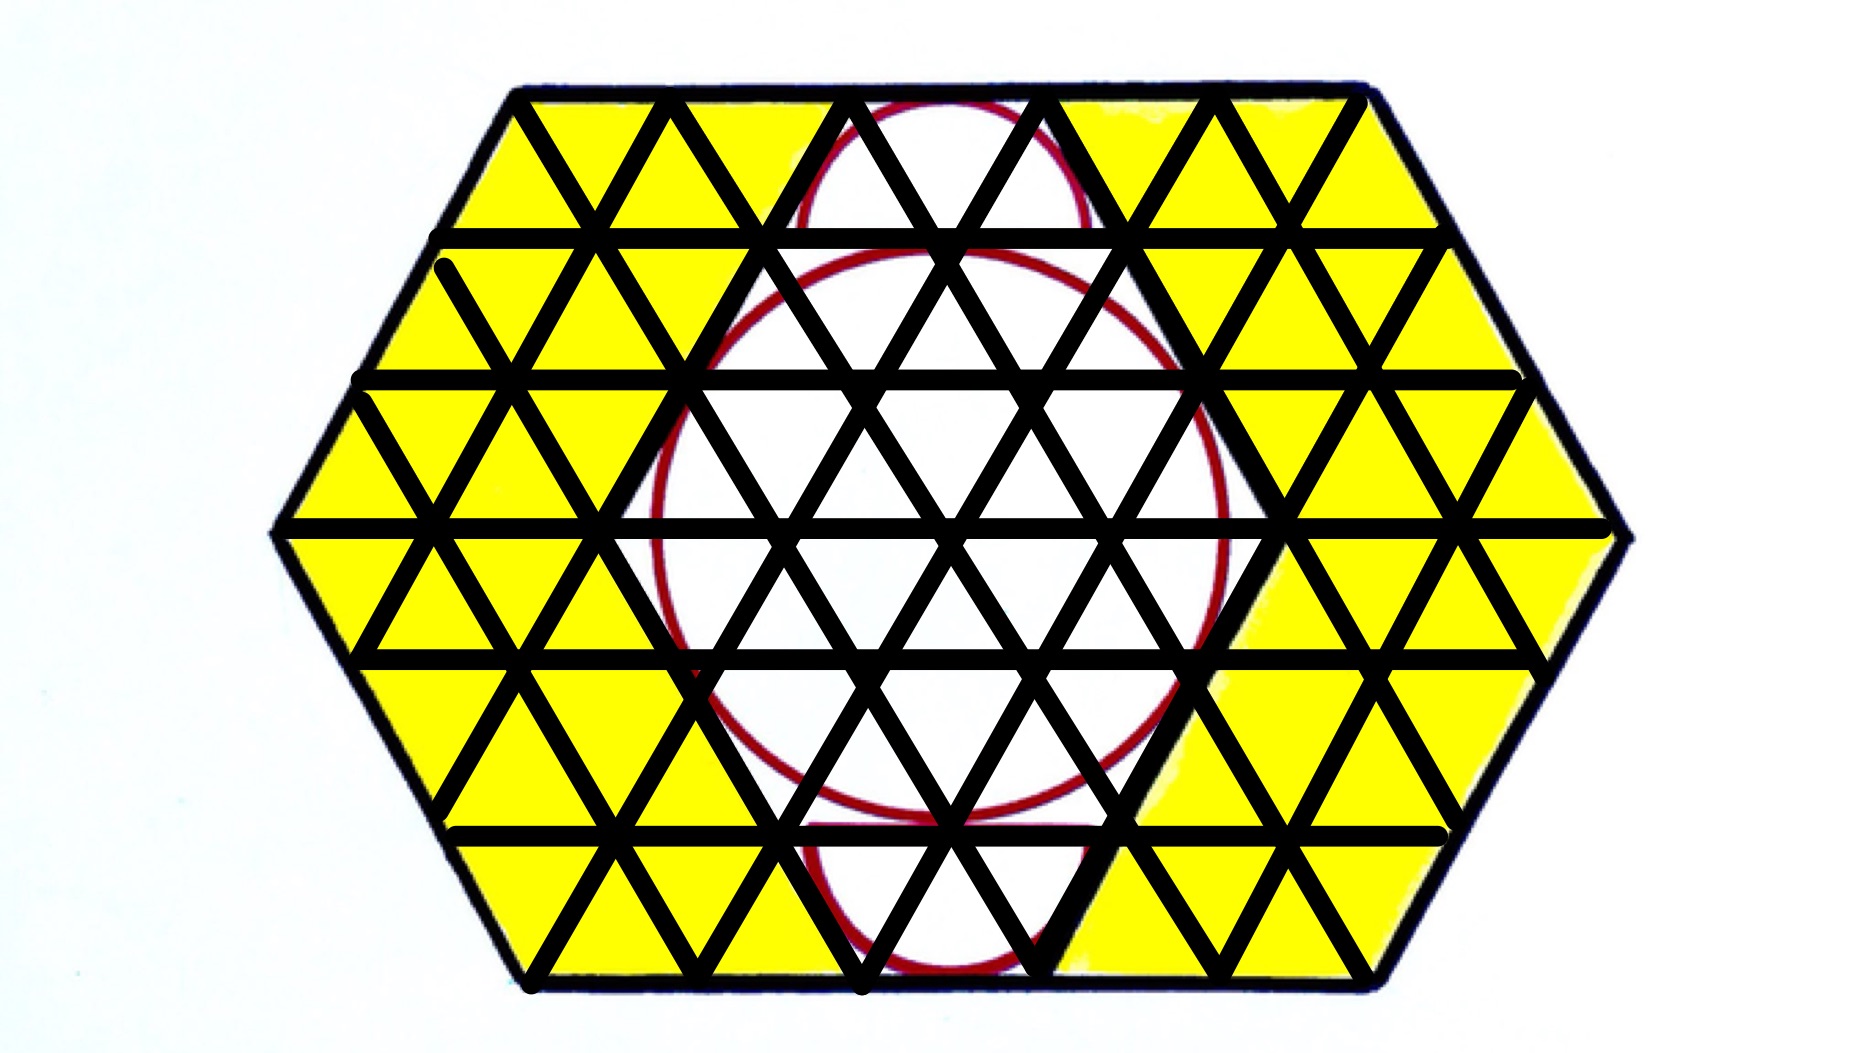 A circle and two semi-circles in two hexagons divided